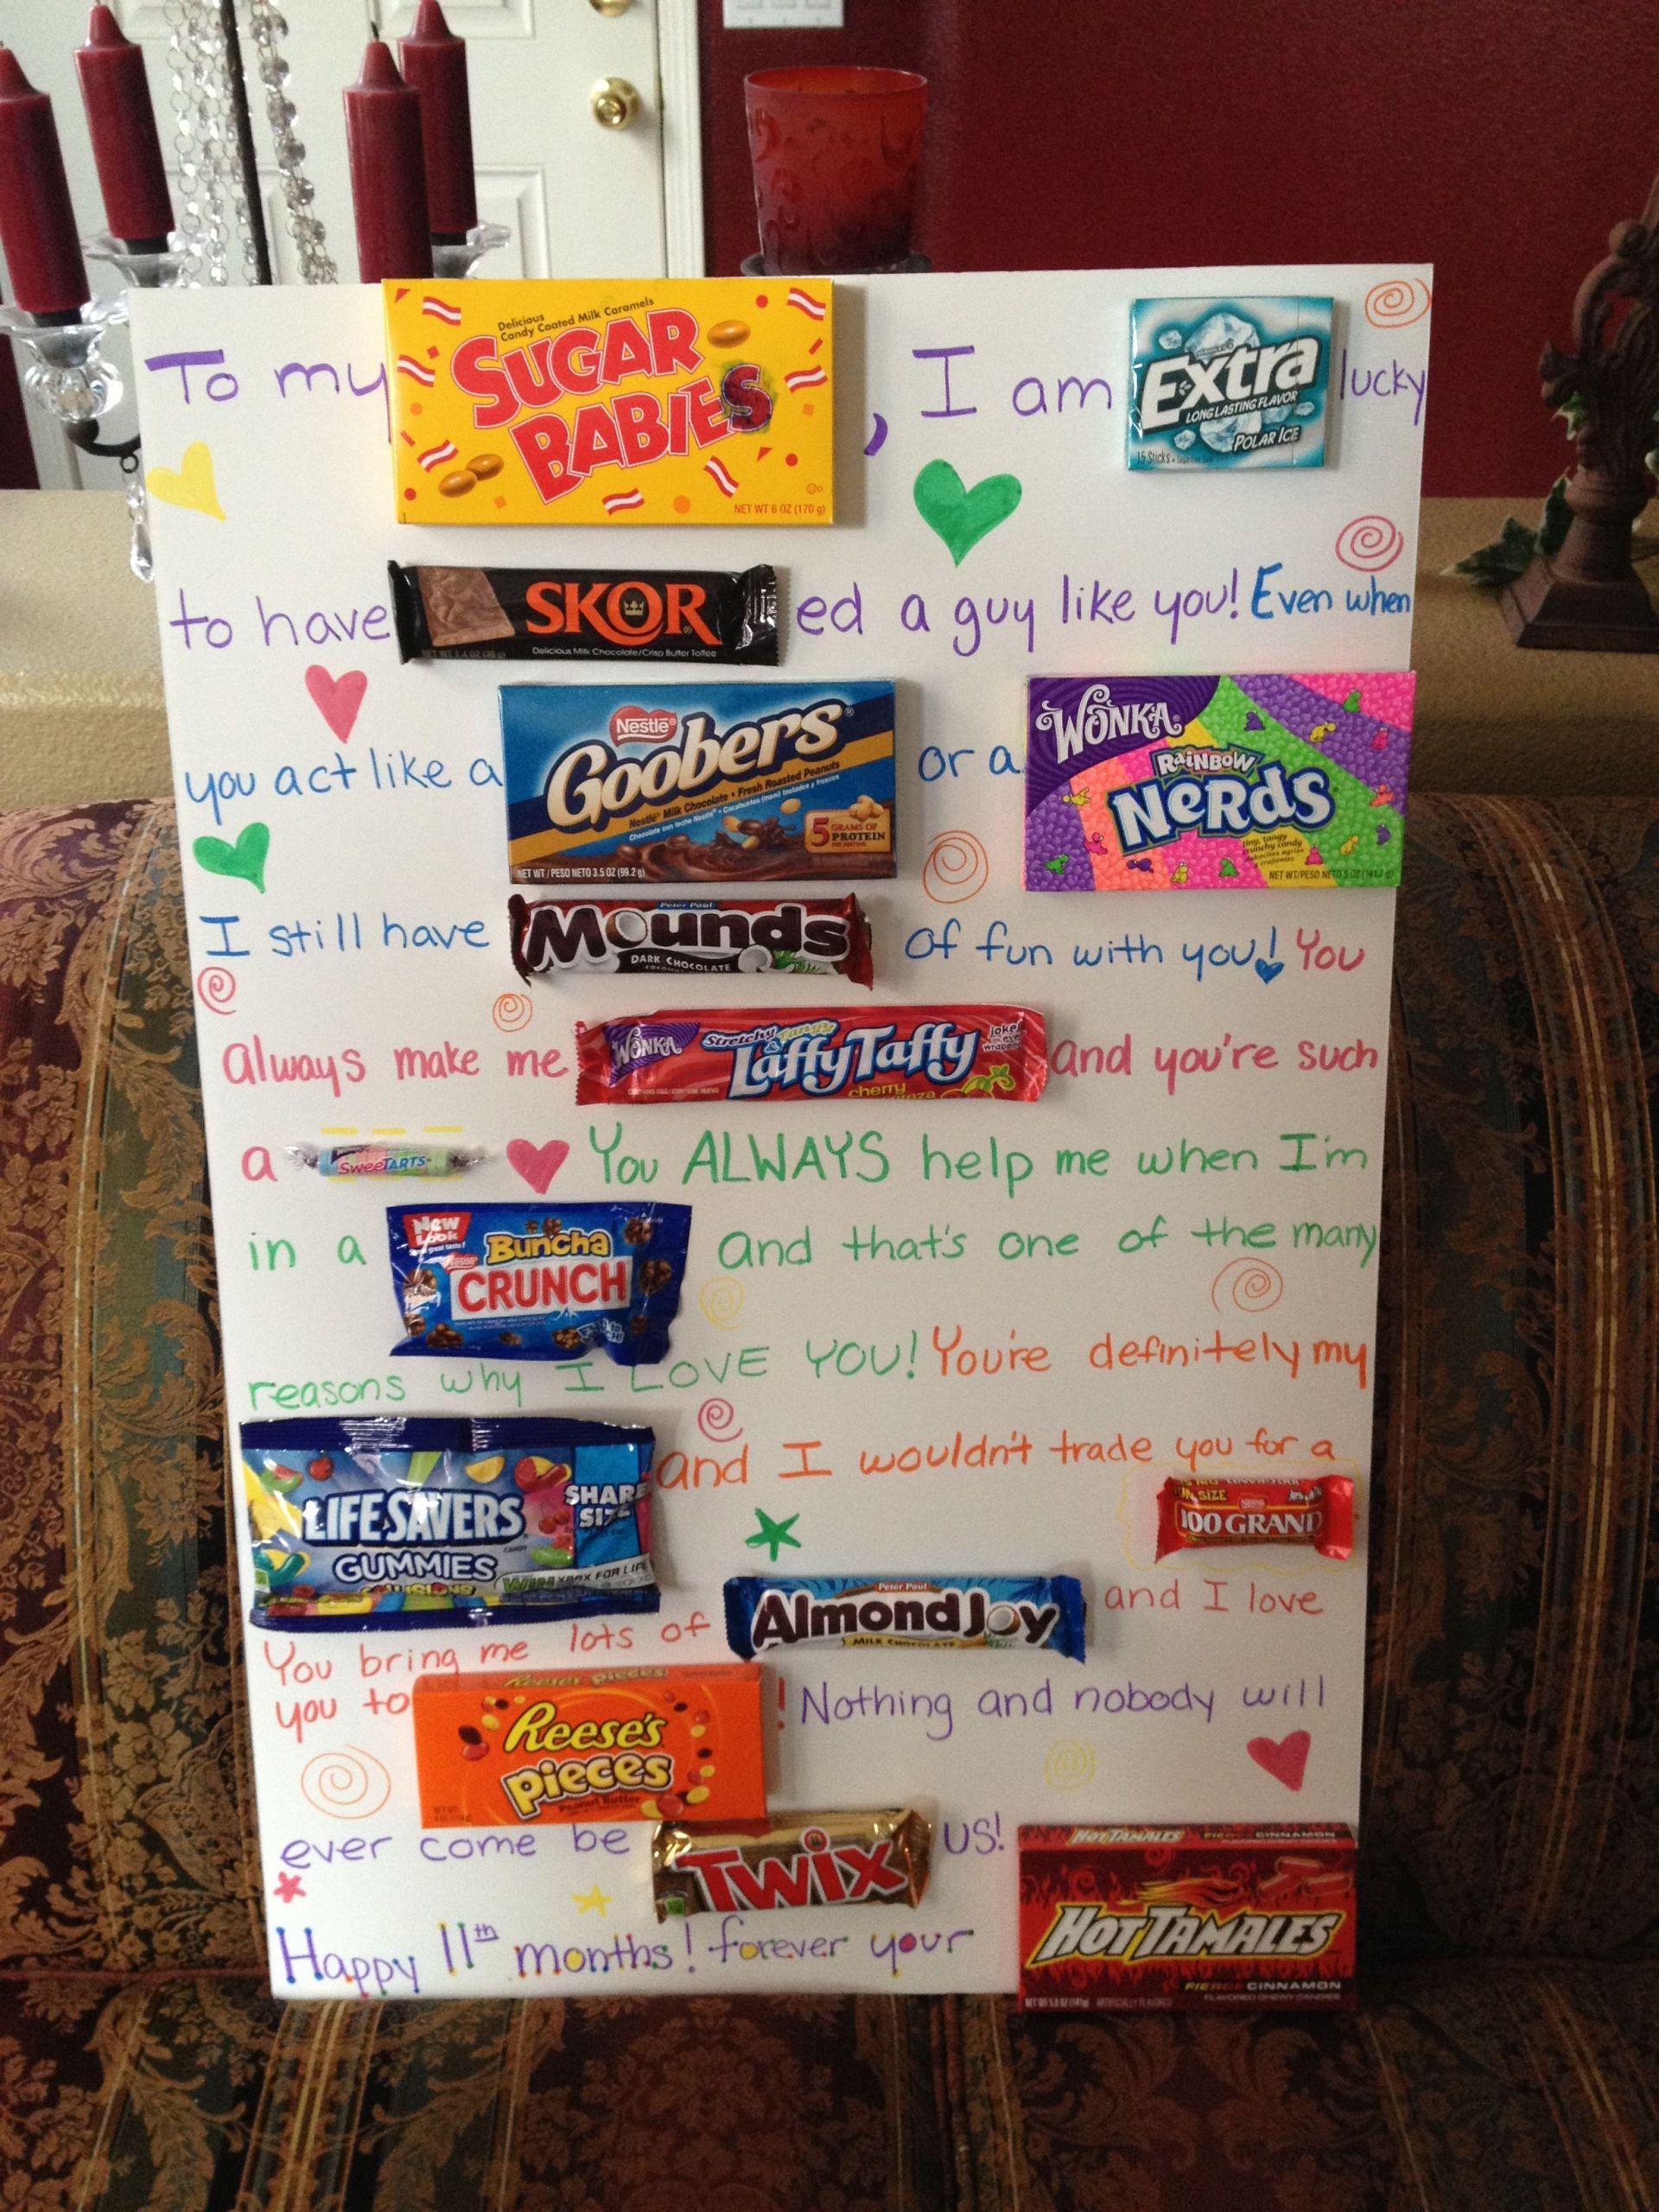 Creative Homemade Gift Ideas Boyfriend
 That s so creative but you have to all that candy